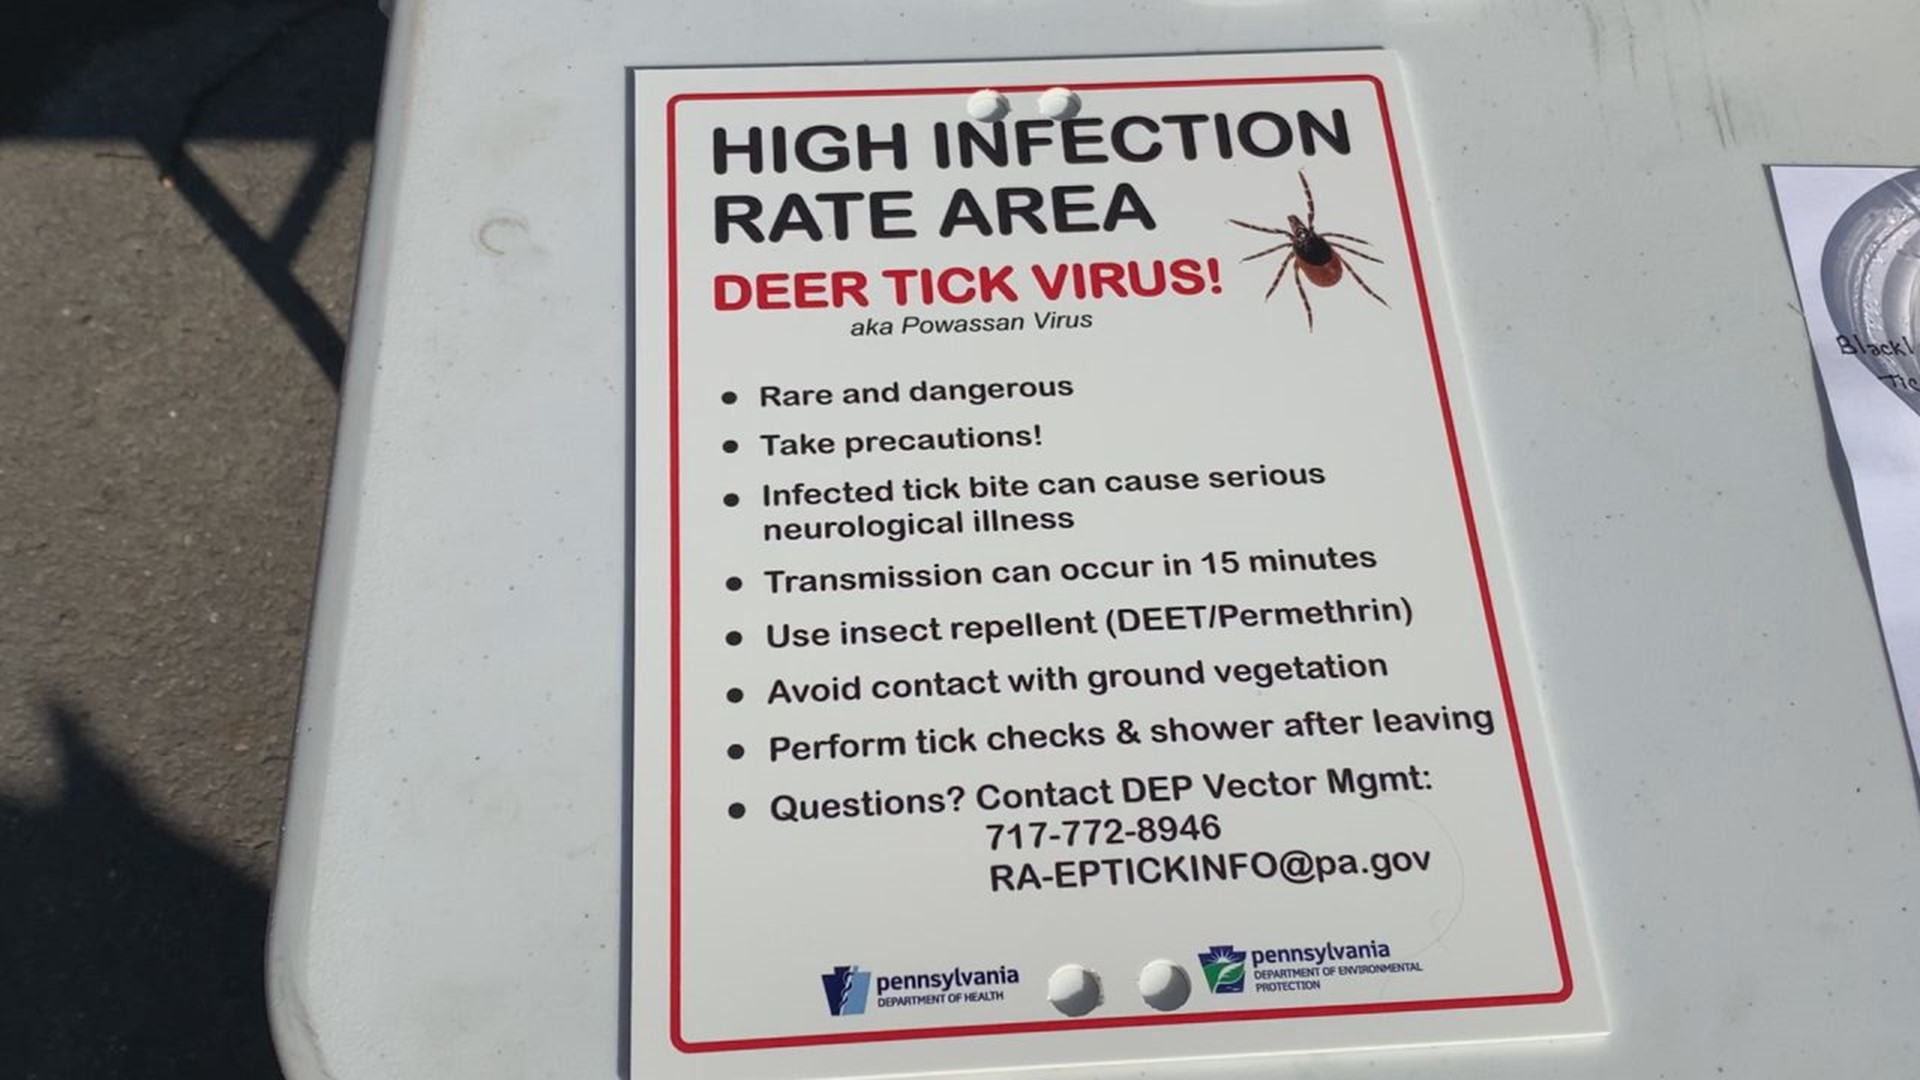 Tick specialists with DEP say the ticks collected show a high infection rate and want the public to be extra cautious as they head outdoors this spring.